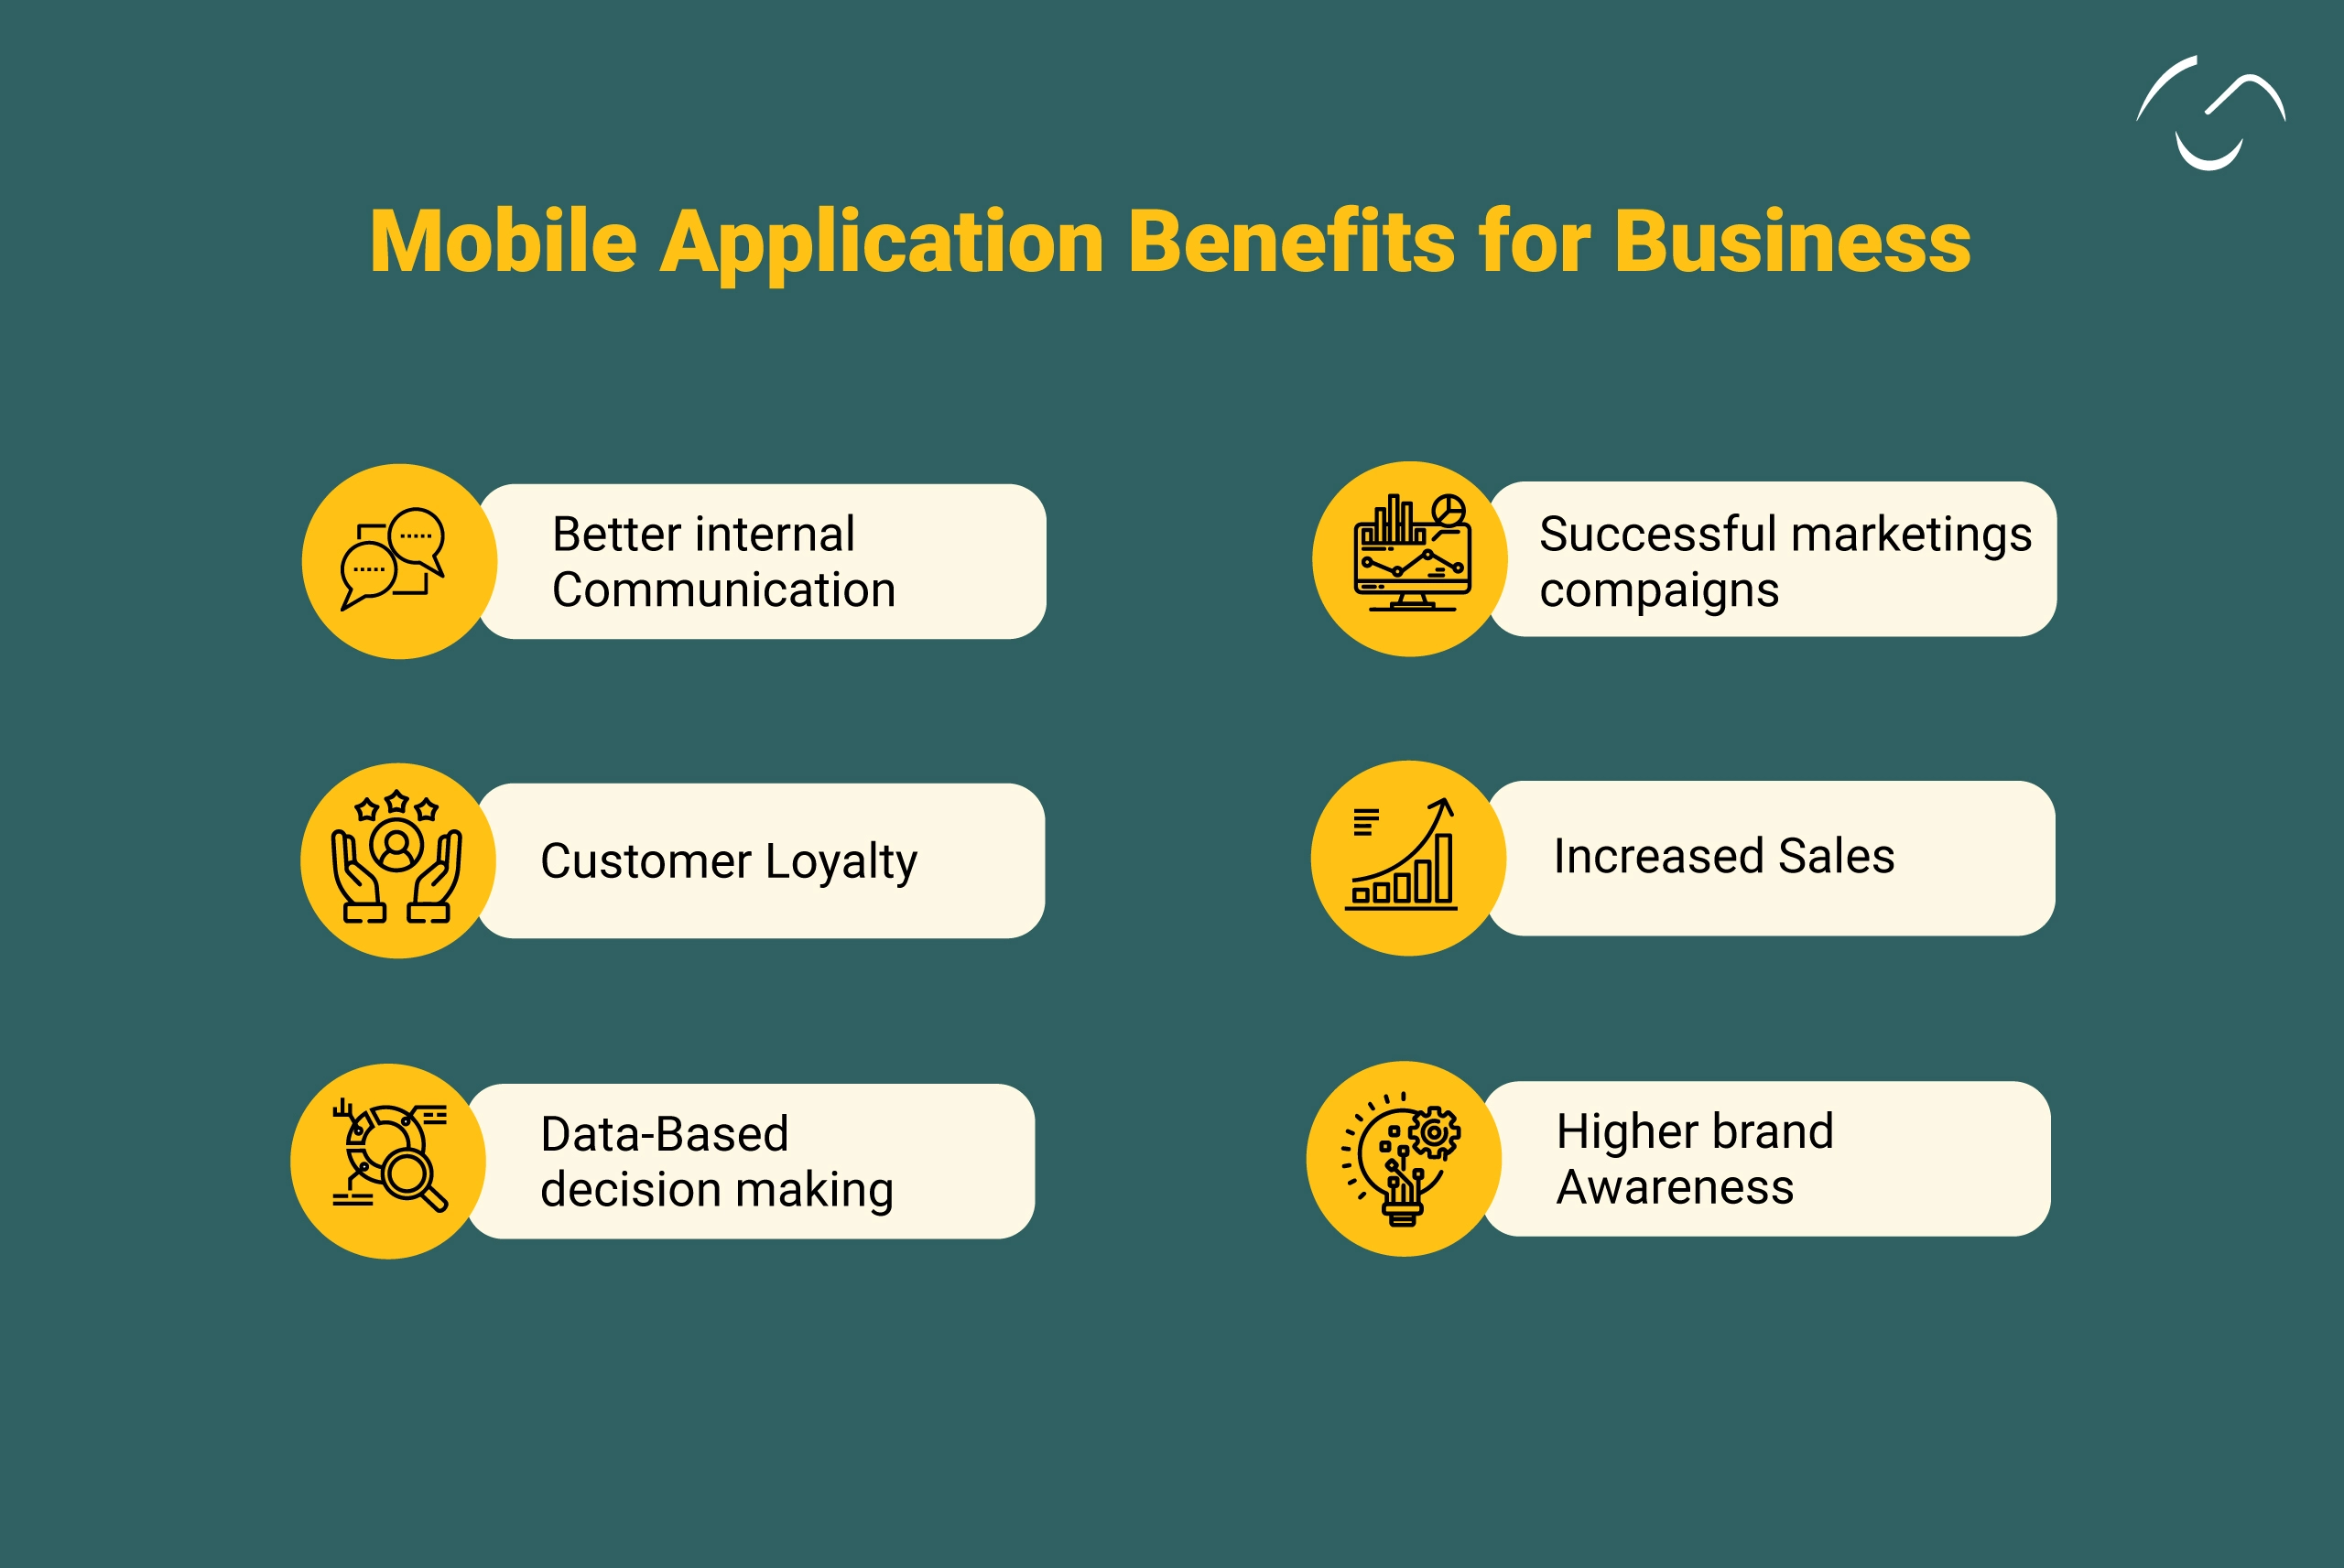 Mobile application benefits for business